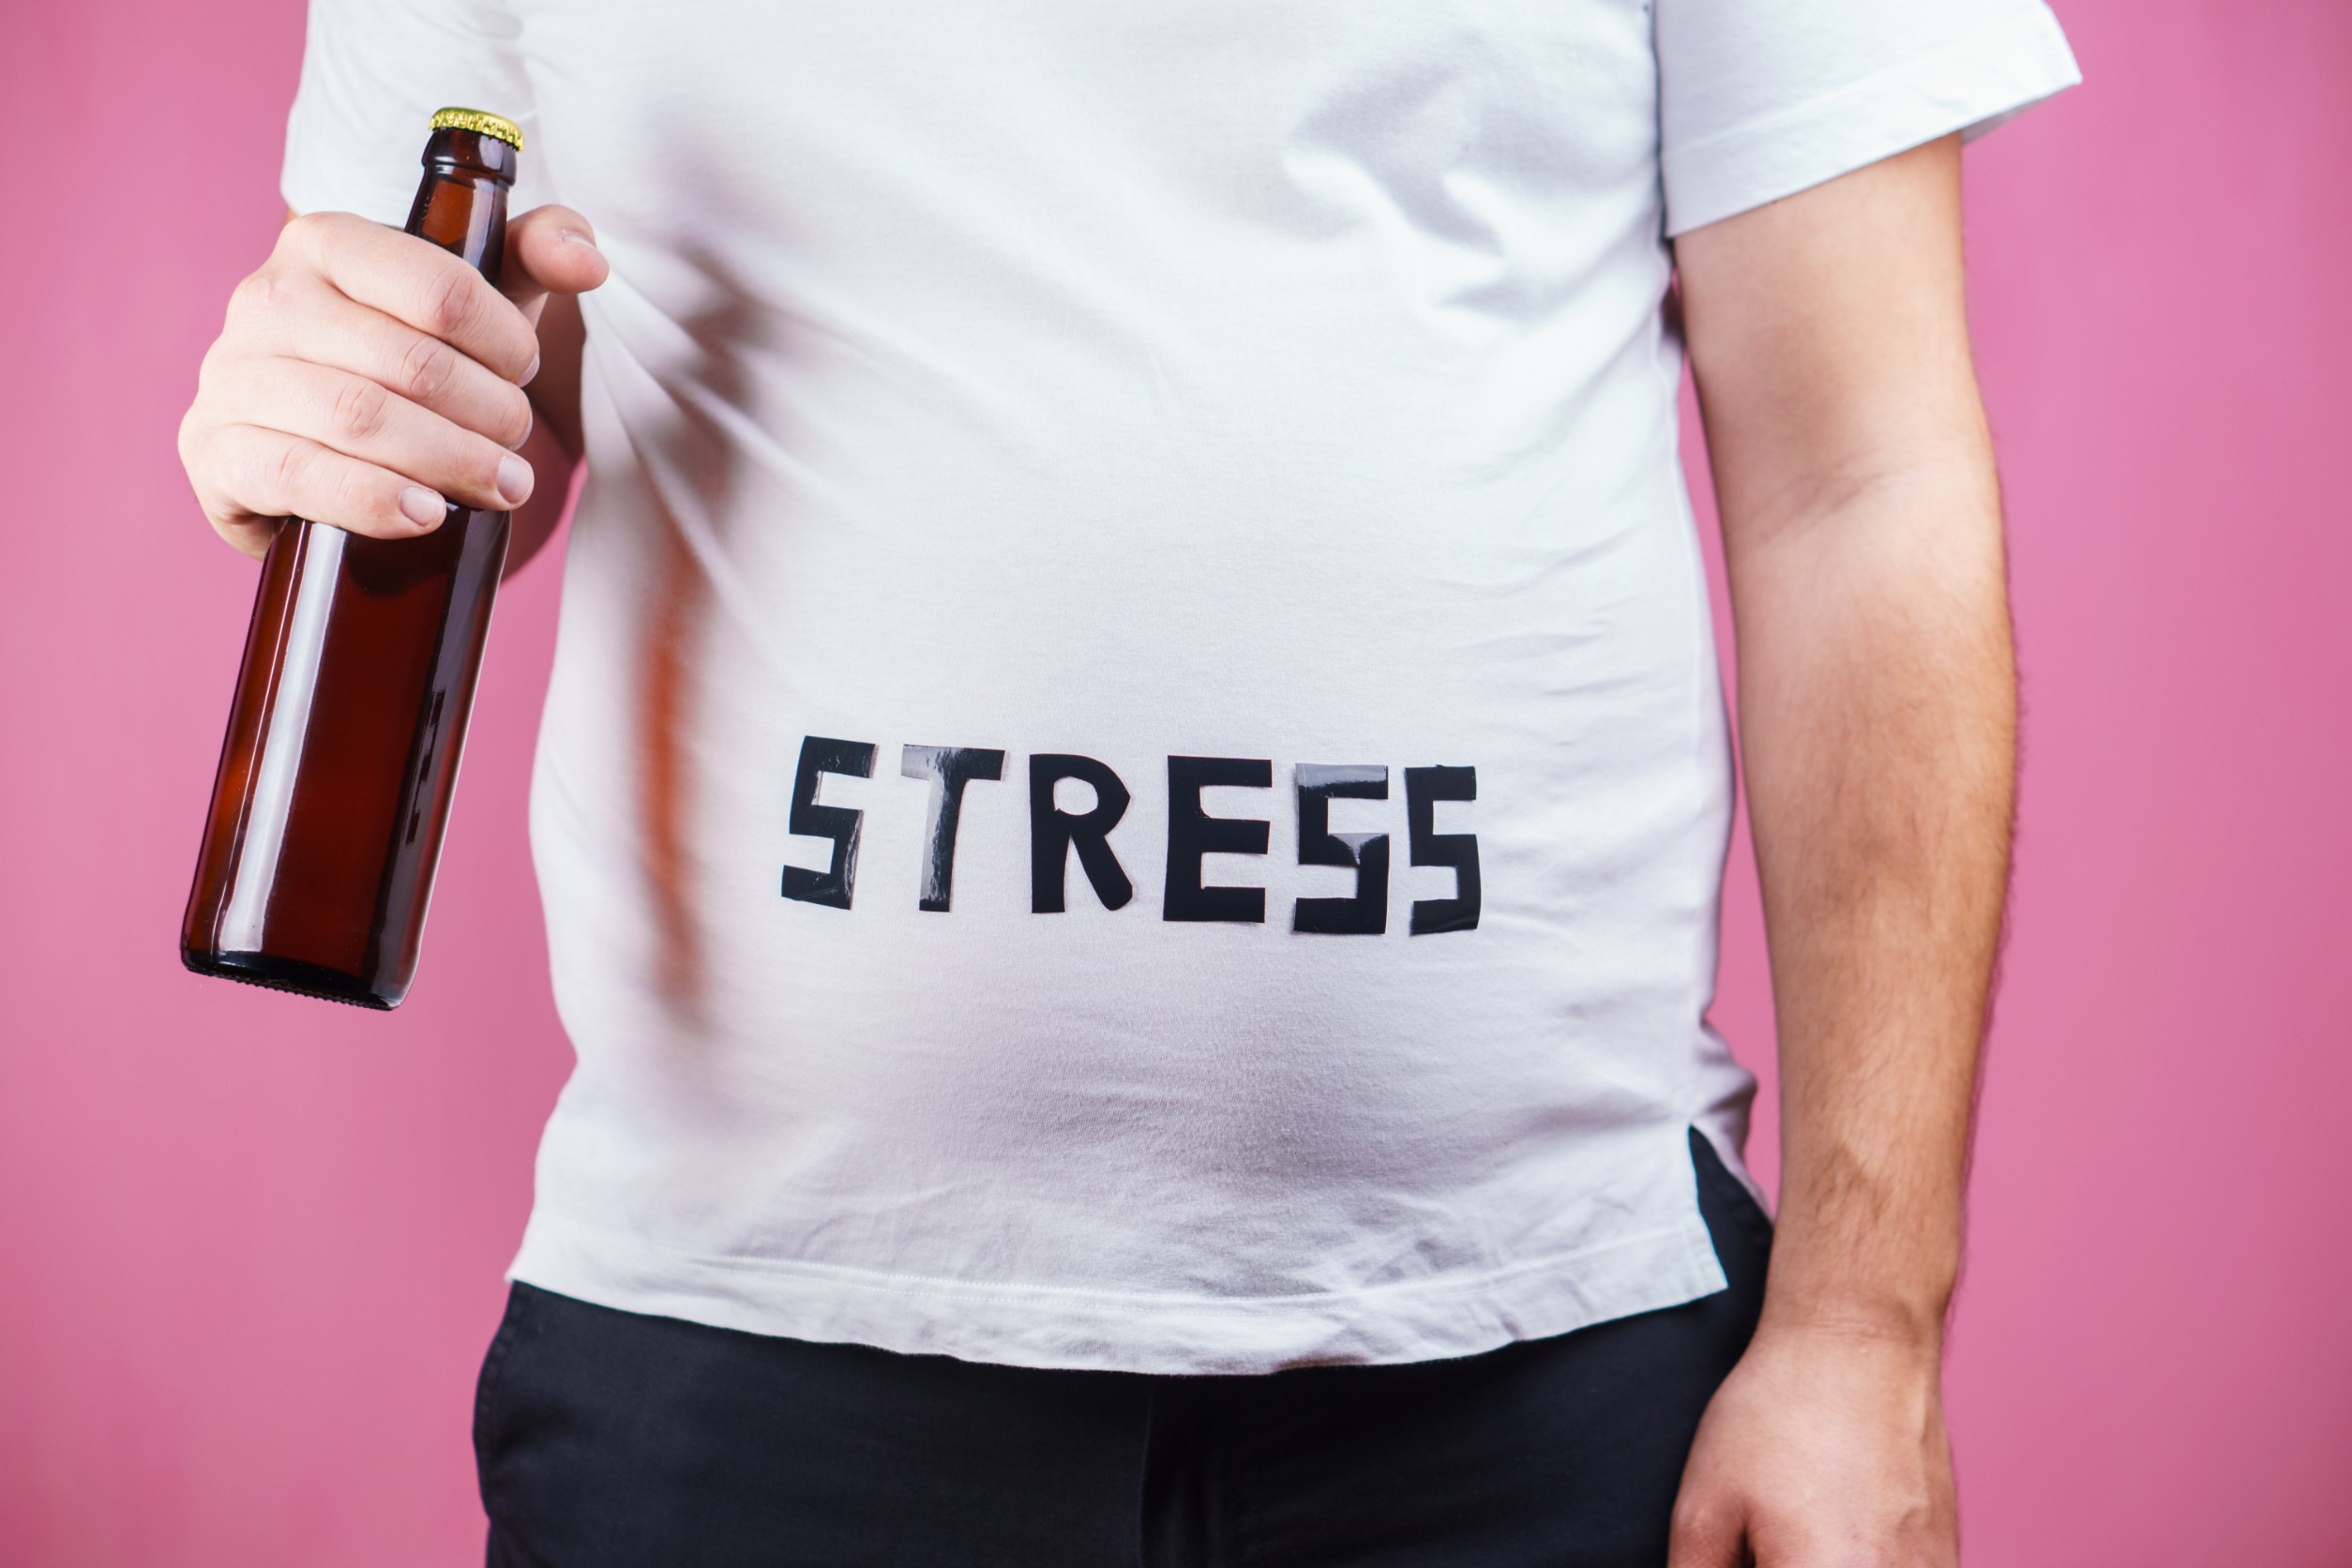 <p>Chronic stress triggers the release of cortisol, known as the stress hormone. Elevated cortisol levels can lead to increased abdominal fat storage and cravings for high-calorie foods. Managing stress through relaxation techniques, exercise, and adequate sleep can help regulate cortisol levels and support weight loss efforts. </p> :: 123rf